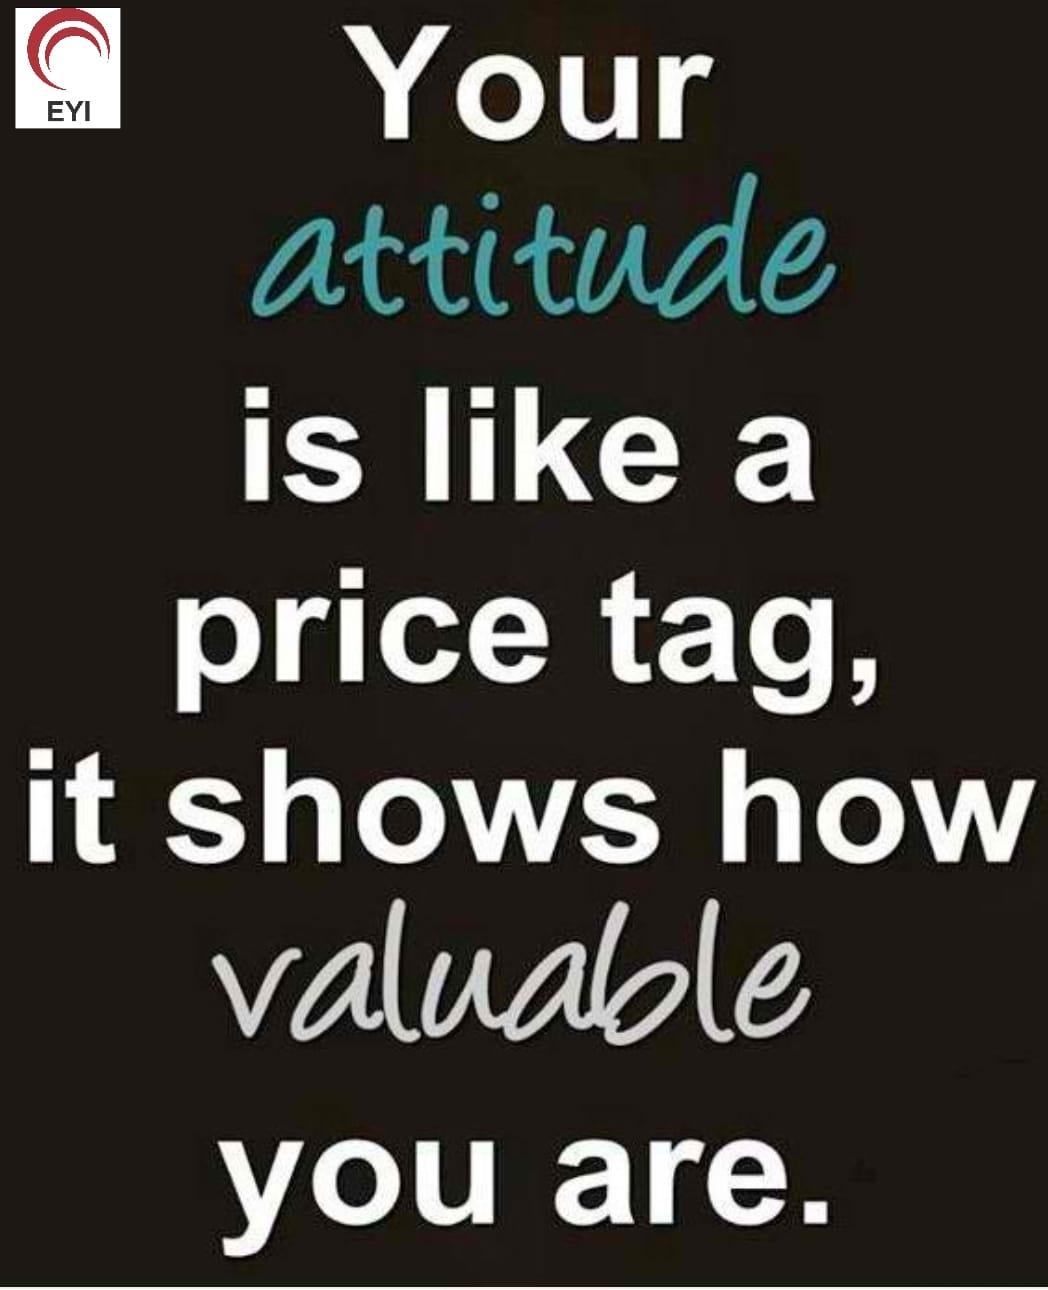 What’s Your ATTITUDE?